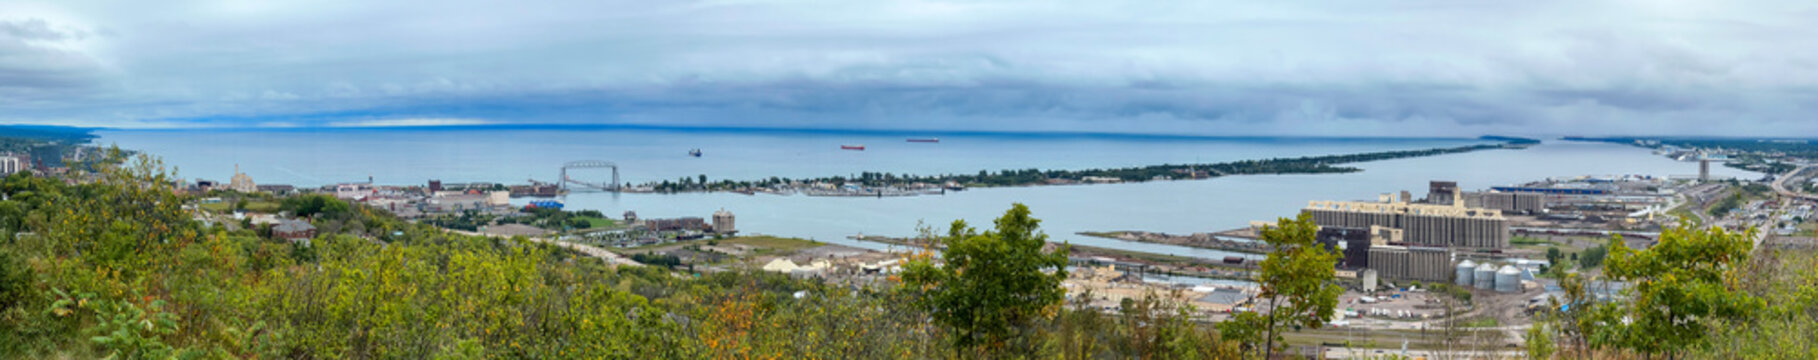 Panorama of Duluth, Minnesota and Lake Superior, as seen from Enger Park on a cloudy day.